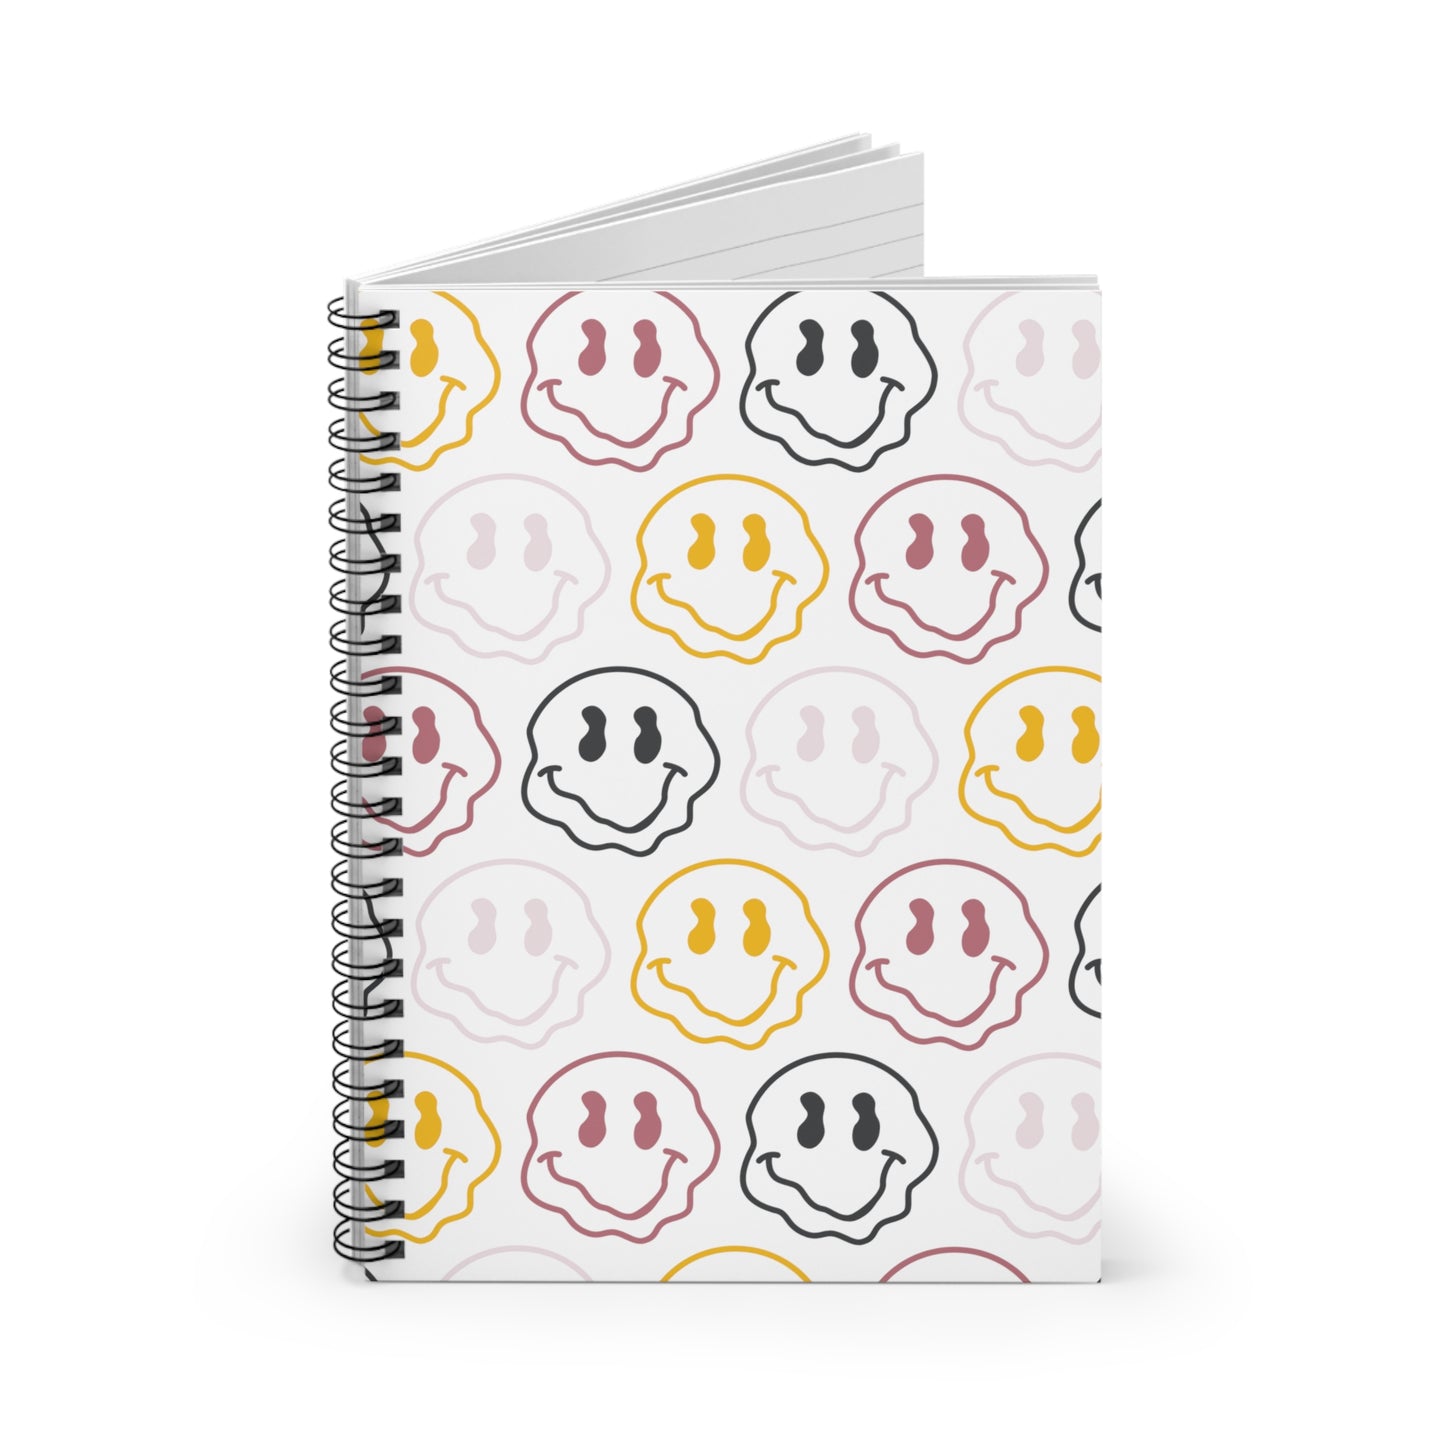 Distorted Smiley Face Spiral Notebook - Ruled Line